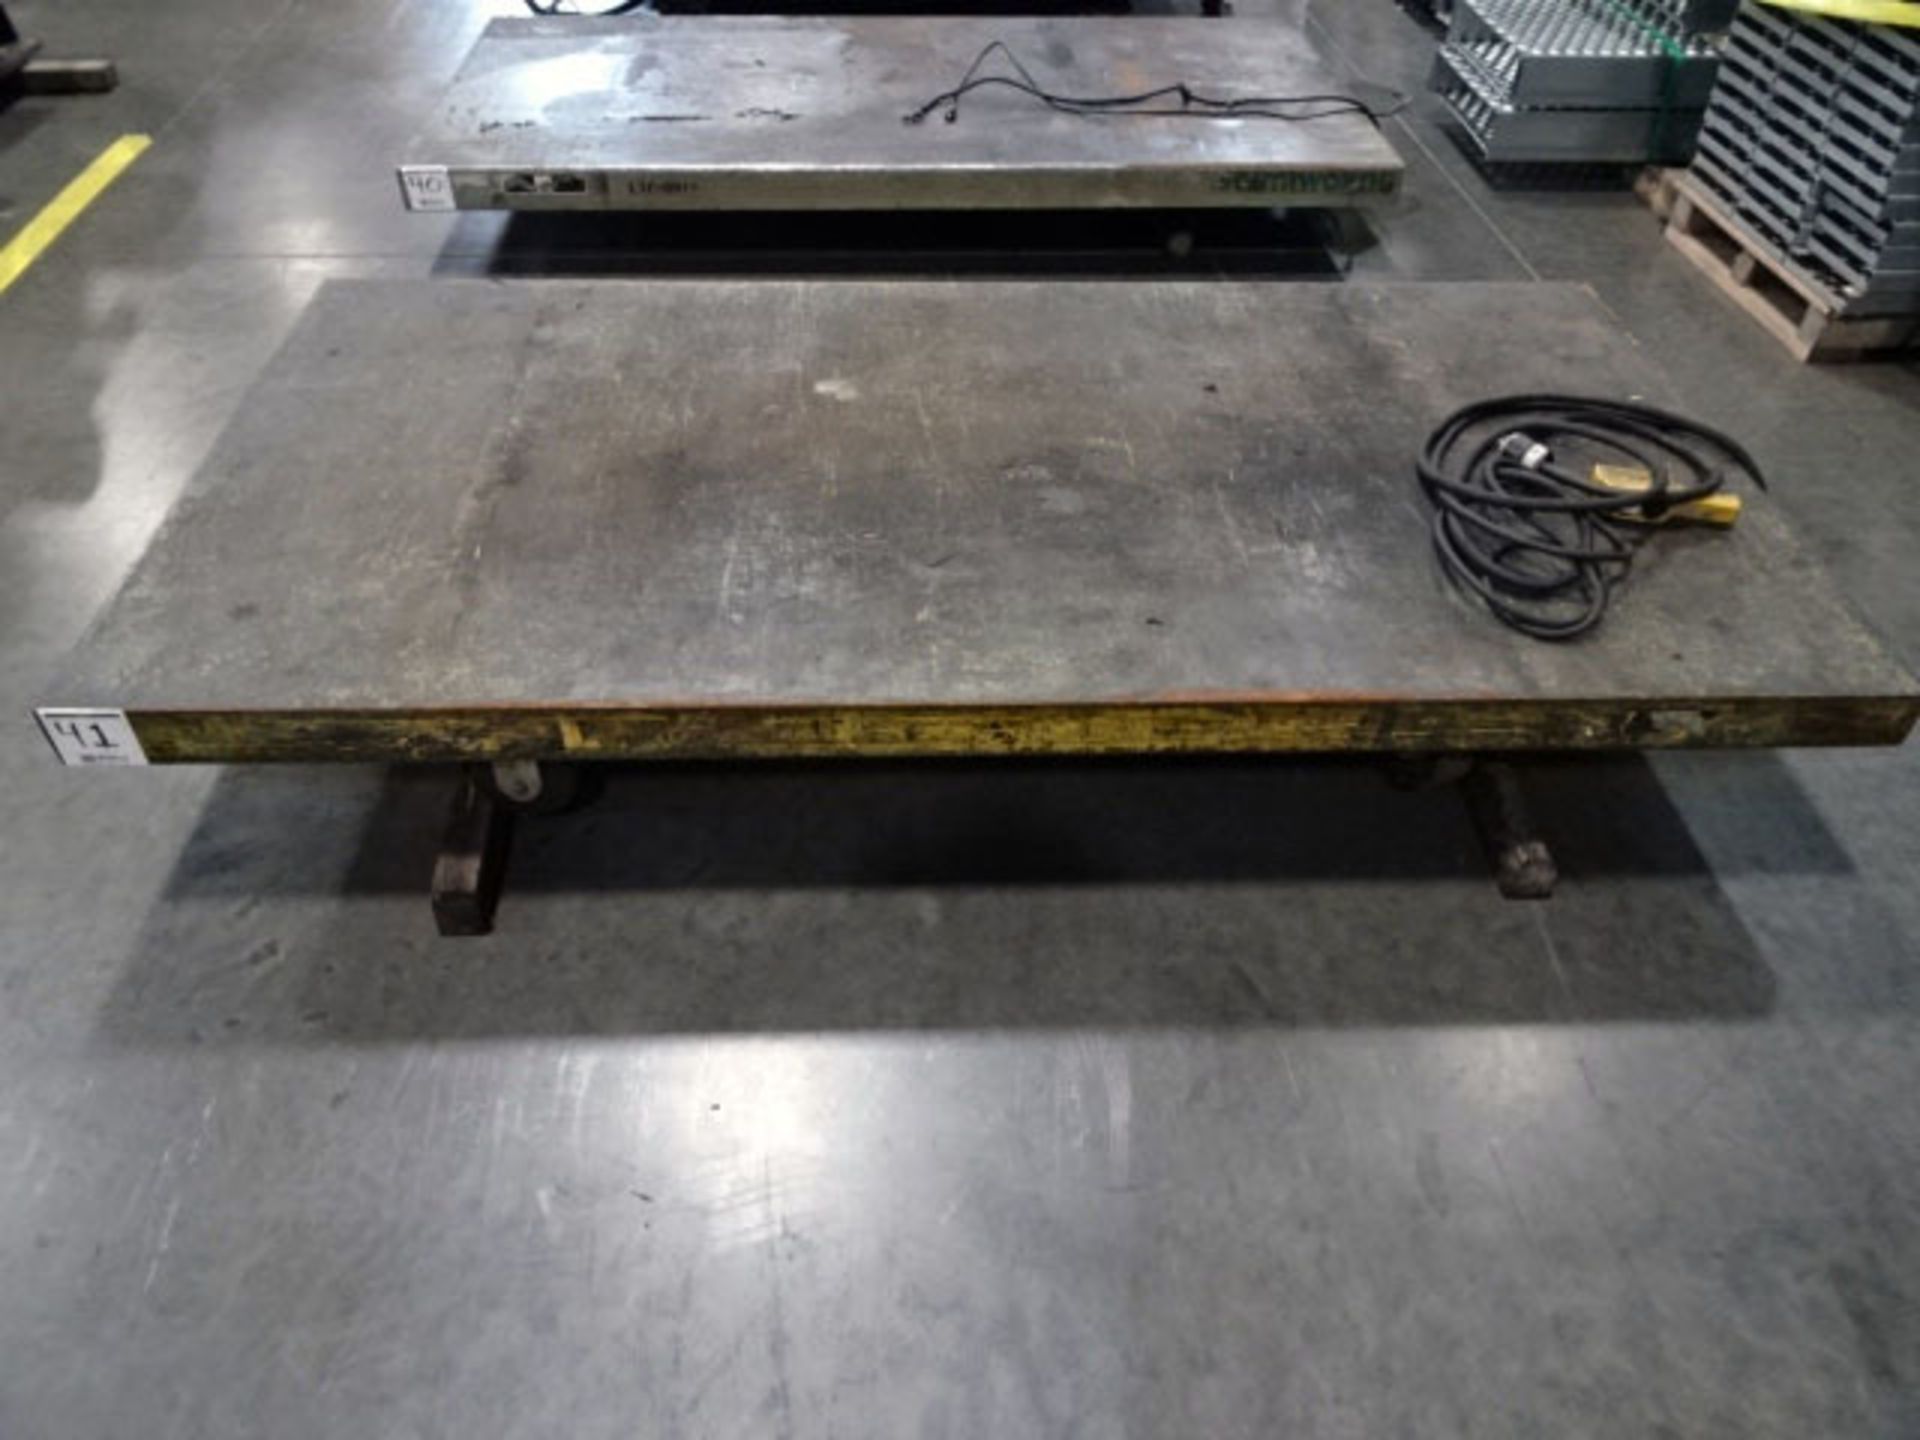 Autoquip Hydraulic Scissor Lift Table | 4,000 Lb. x 96" x 48", Mdl: Series 35, S/N: - Located In: - Image 2 of 2